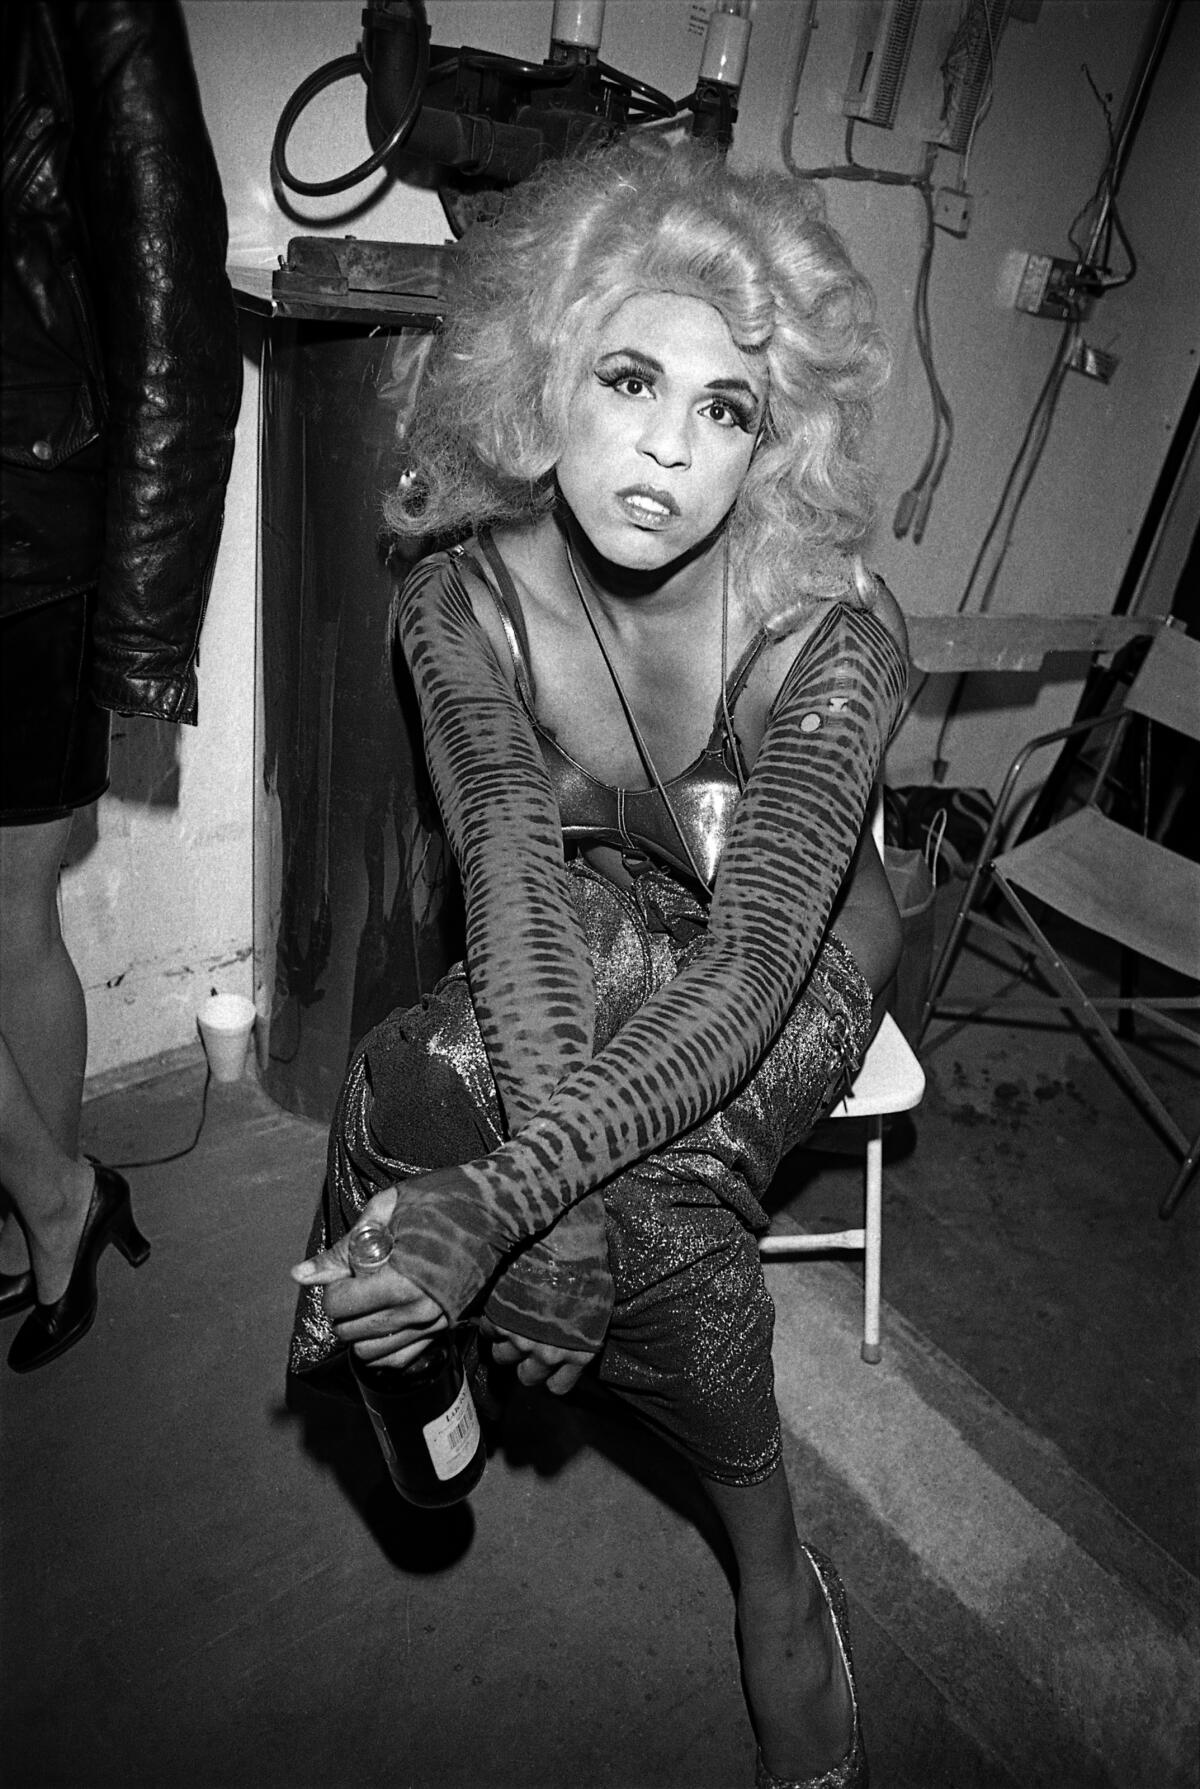 Performance artist Vaginal Davis, decked out in a blonde wig and cone bra, sits while holding a drink